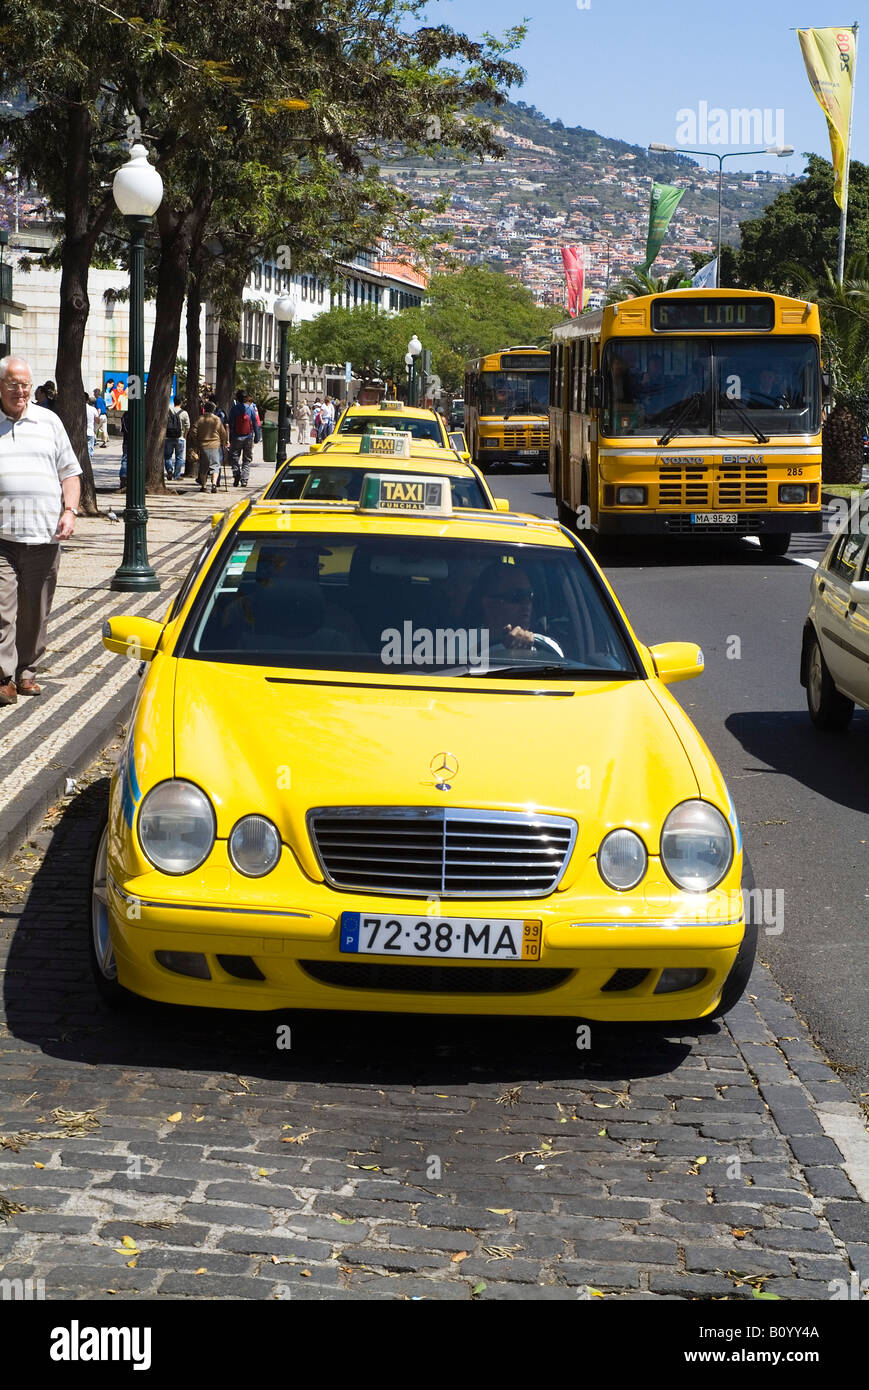 dh taxirank cab FUNCHAL MADEIRA Queuing Yellow taxis and buses Funchals city commuter transport taxi queue rank Stock Photo